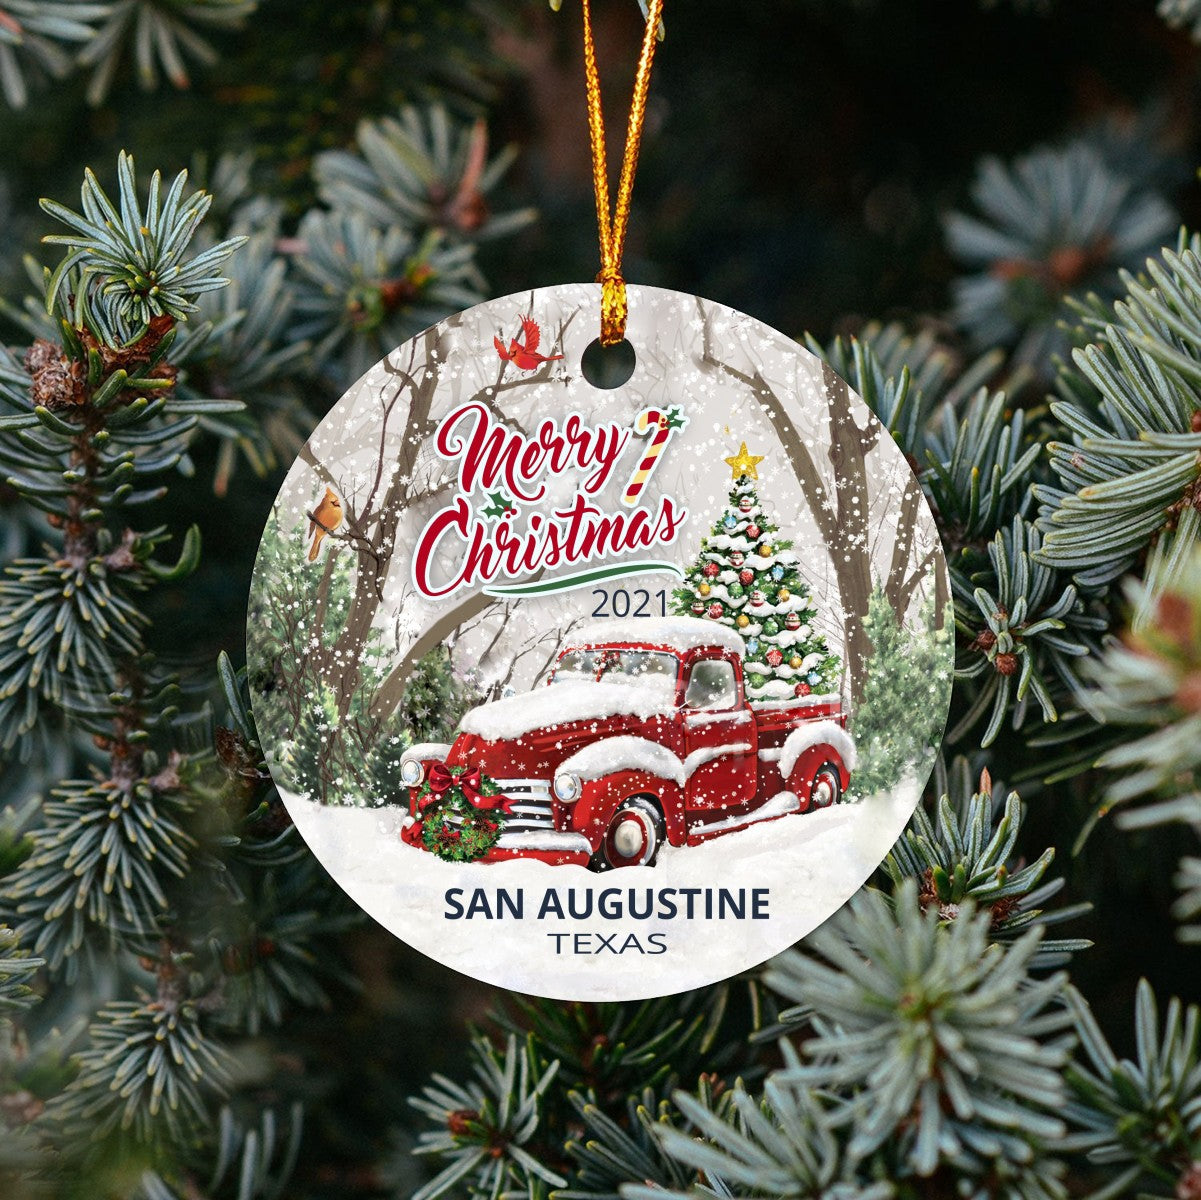 Christmas Tree Ornaments San Augustine - Ornament With Name City, State San Augustine Texas TX Ornament - Red Truck Xmas Ornaments 3'' Plastic Gift For Family, Friend And Housewarming